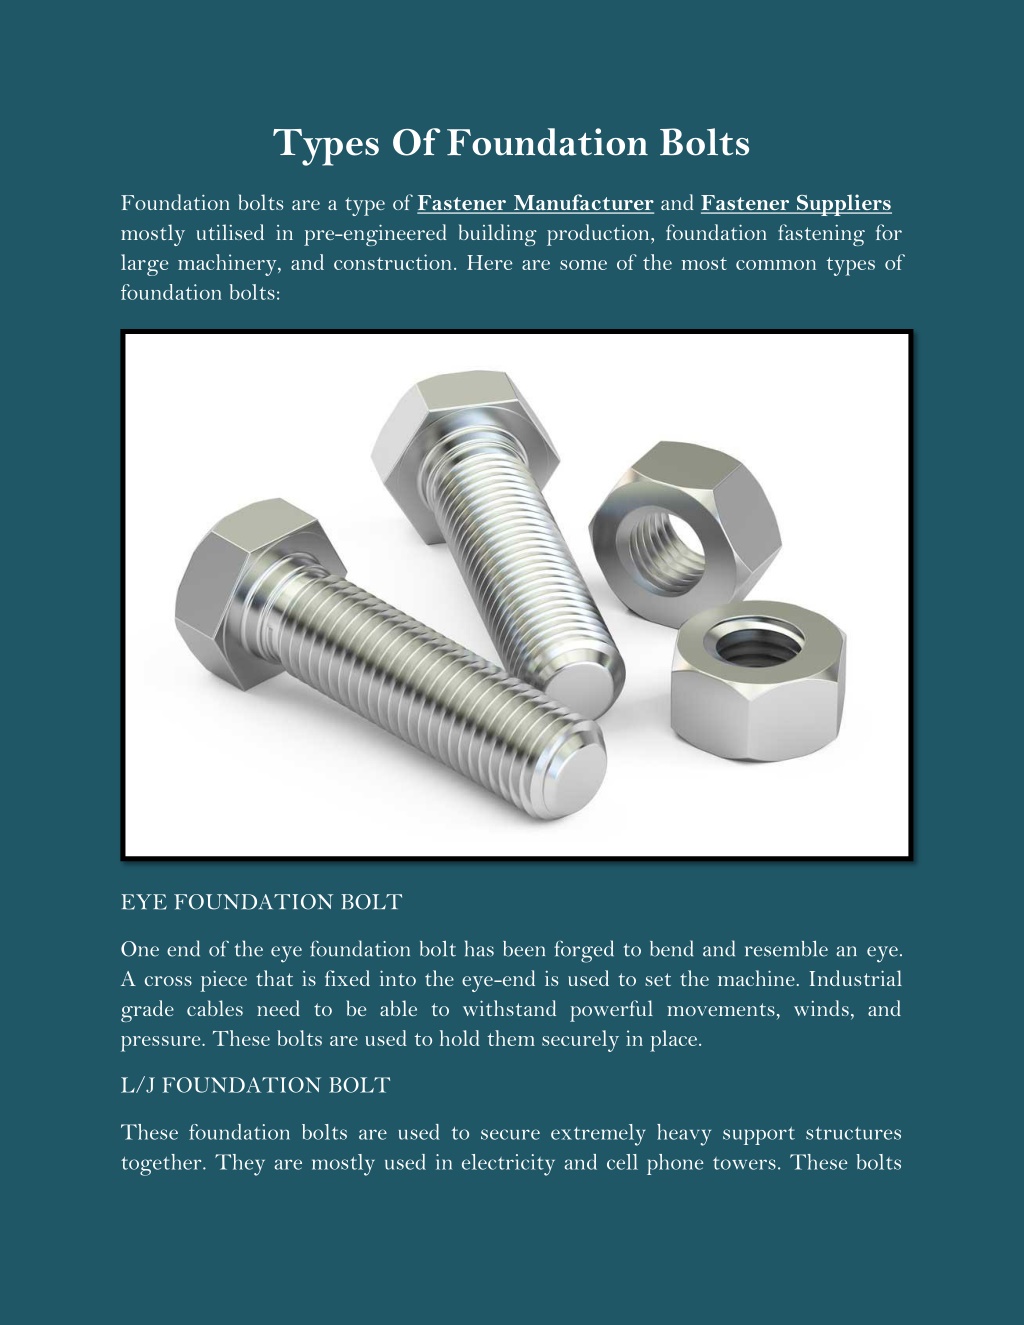 PPT - Types Of Foundation Bolts PowerPoint Presentation, free